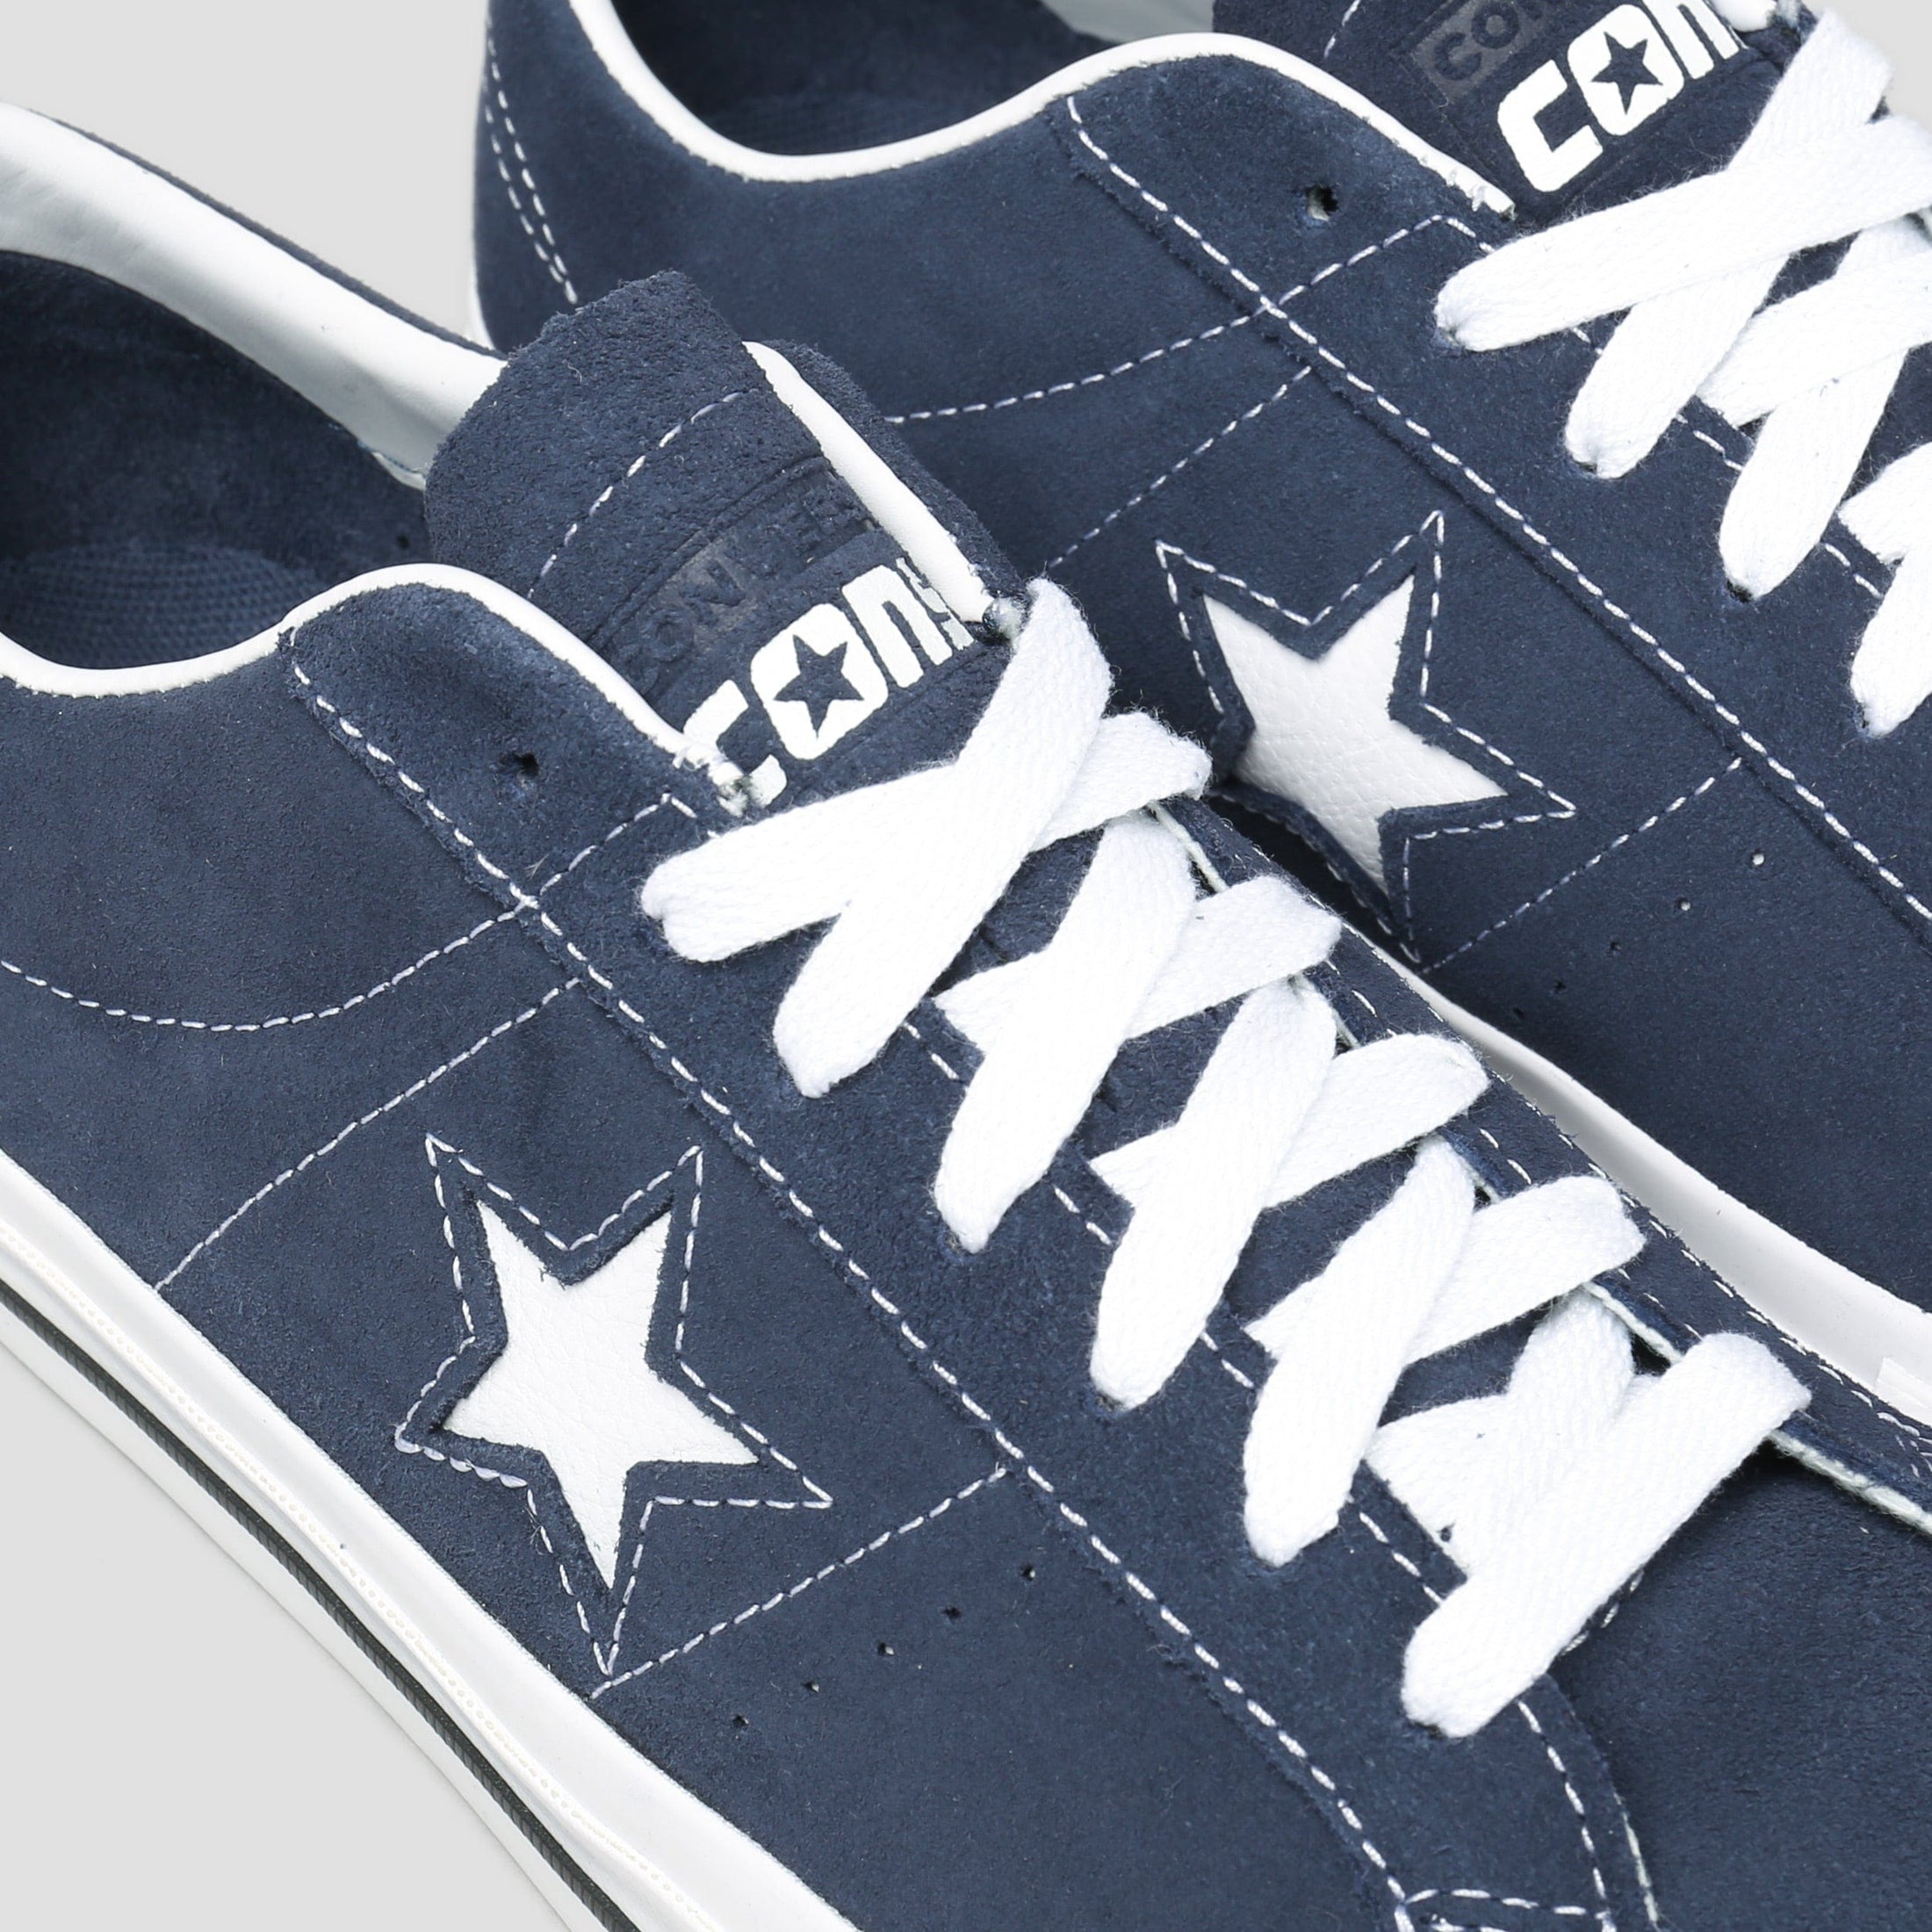 Converse One Star Pro OX Shoes Navy / White / Black